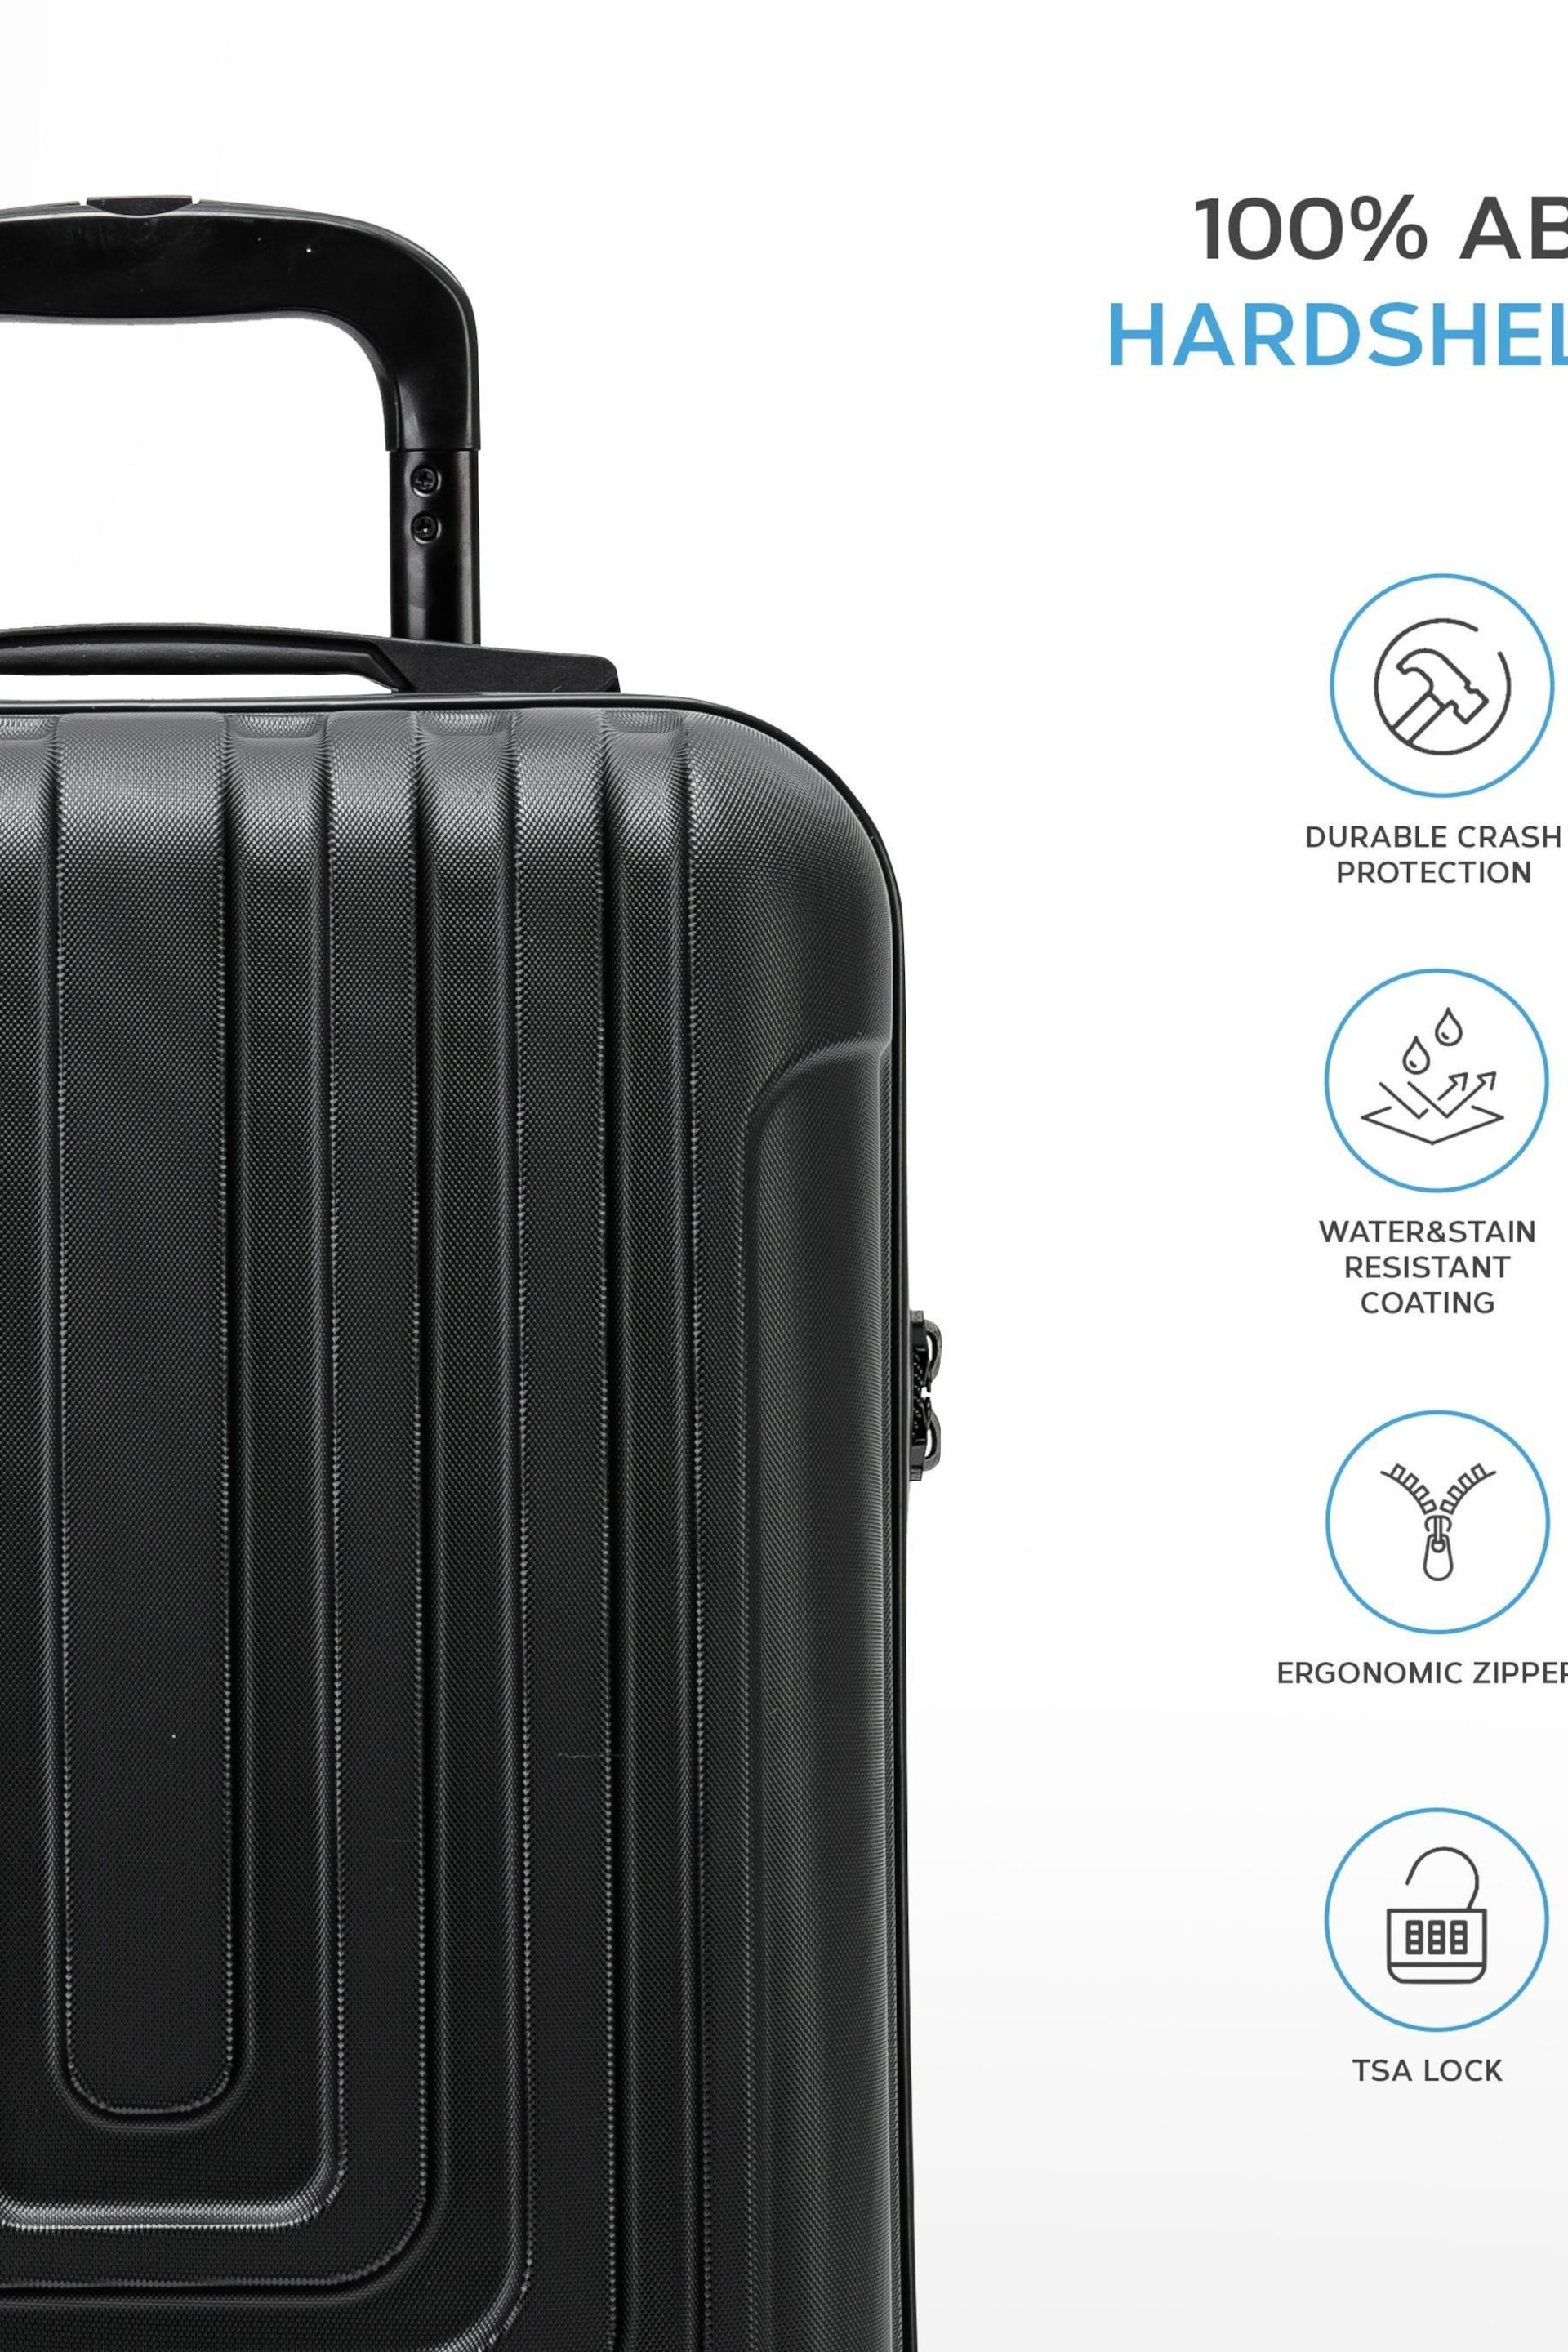 Flight Knight 55x35x20cm 8 Wheel ABS Hard Case Cabin Carry On Hand Black Luggage - Image 3 of 7